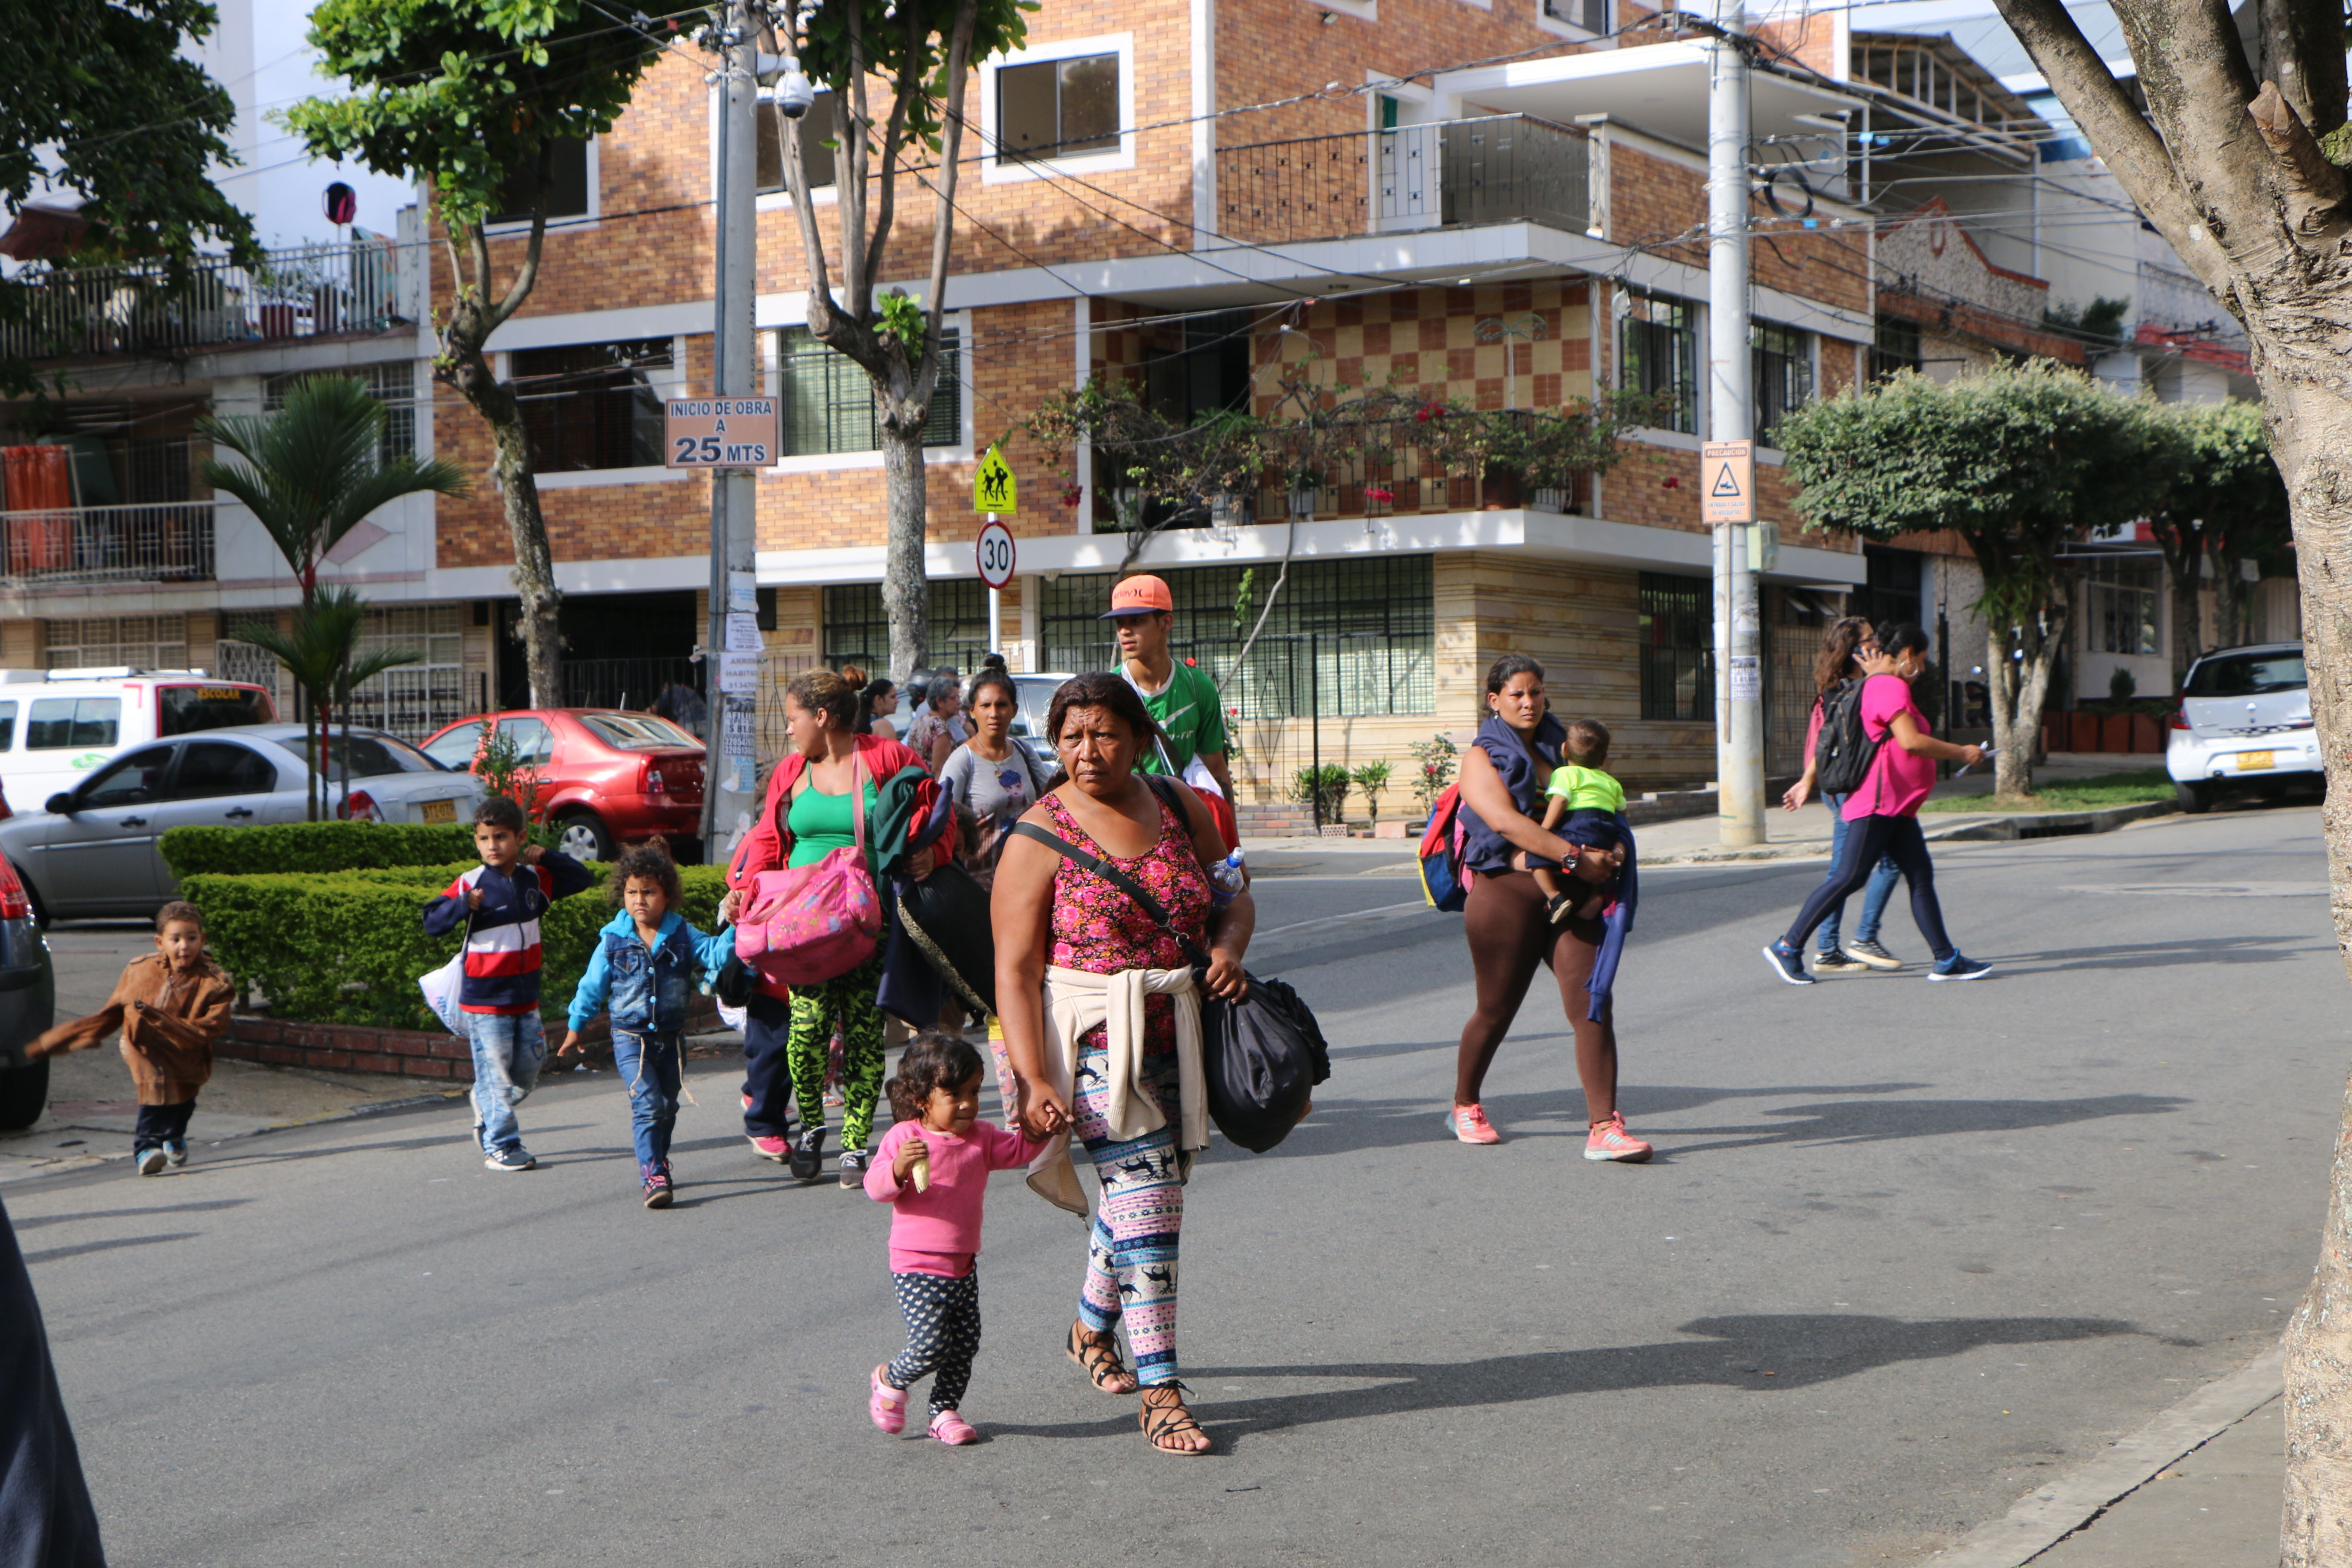 Venezuelan parents and children arrive at Fundación entre dos Tierras, one of the organizations providing aid to arriving migrants, in Bucaramanga, Colombia. At Fundación entre dos Tierras, volunteers serve migrants hot food and provide donations of clothing and other supplies. Image by Patrick Ammerman. Colombia, 2019.